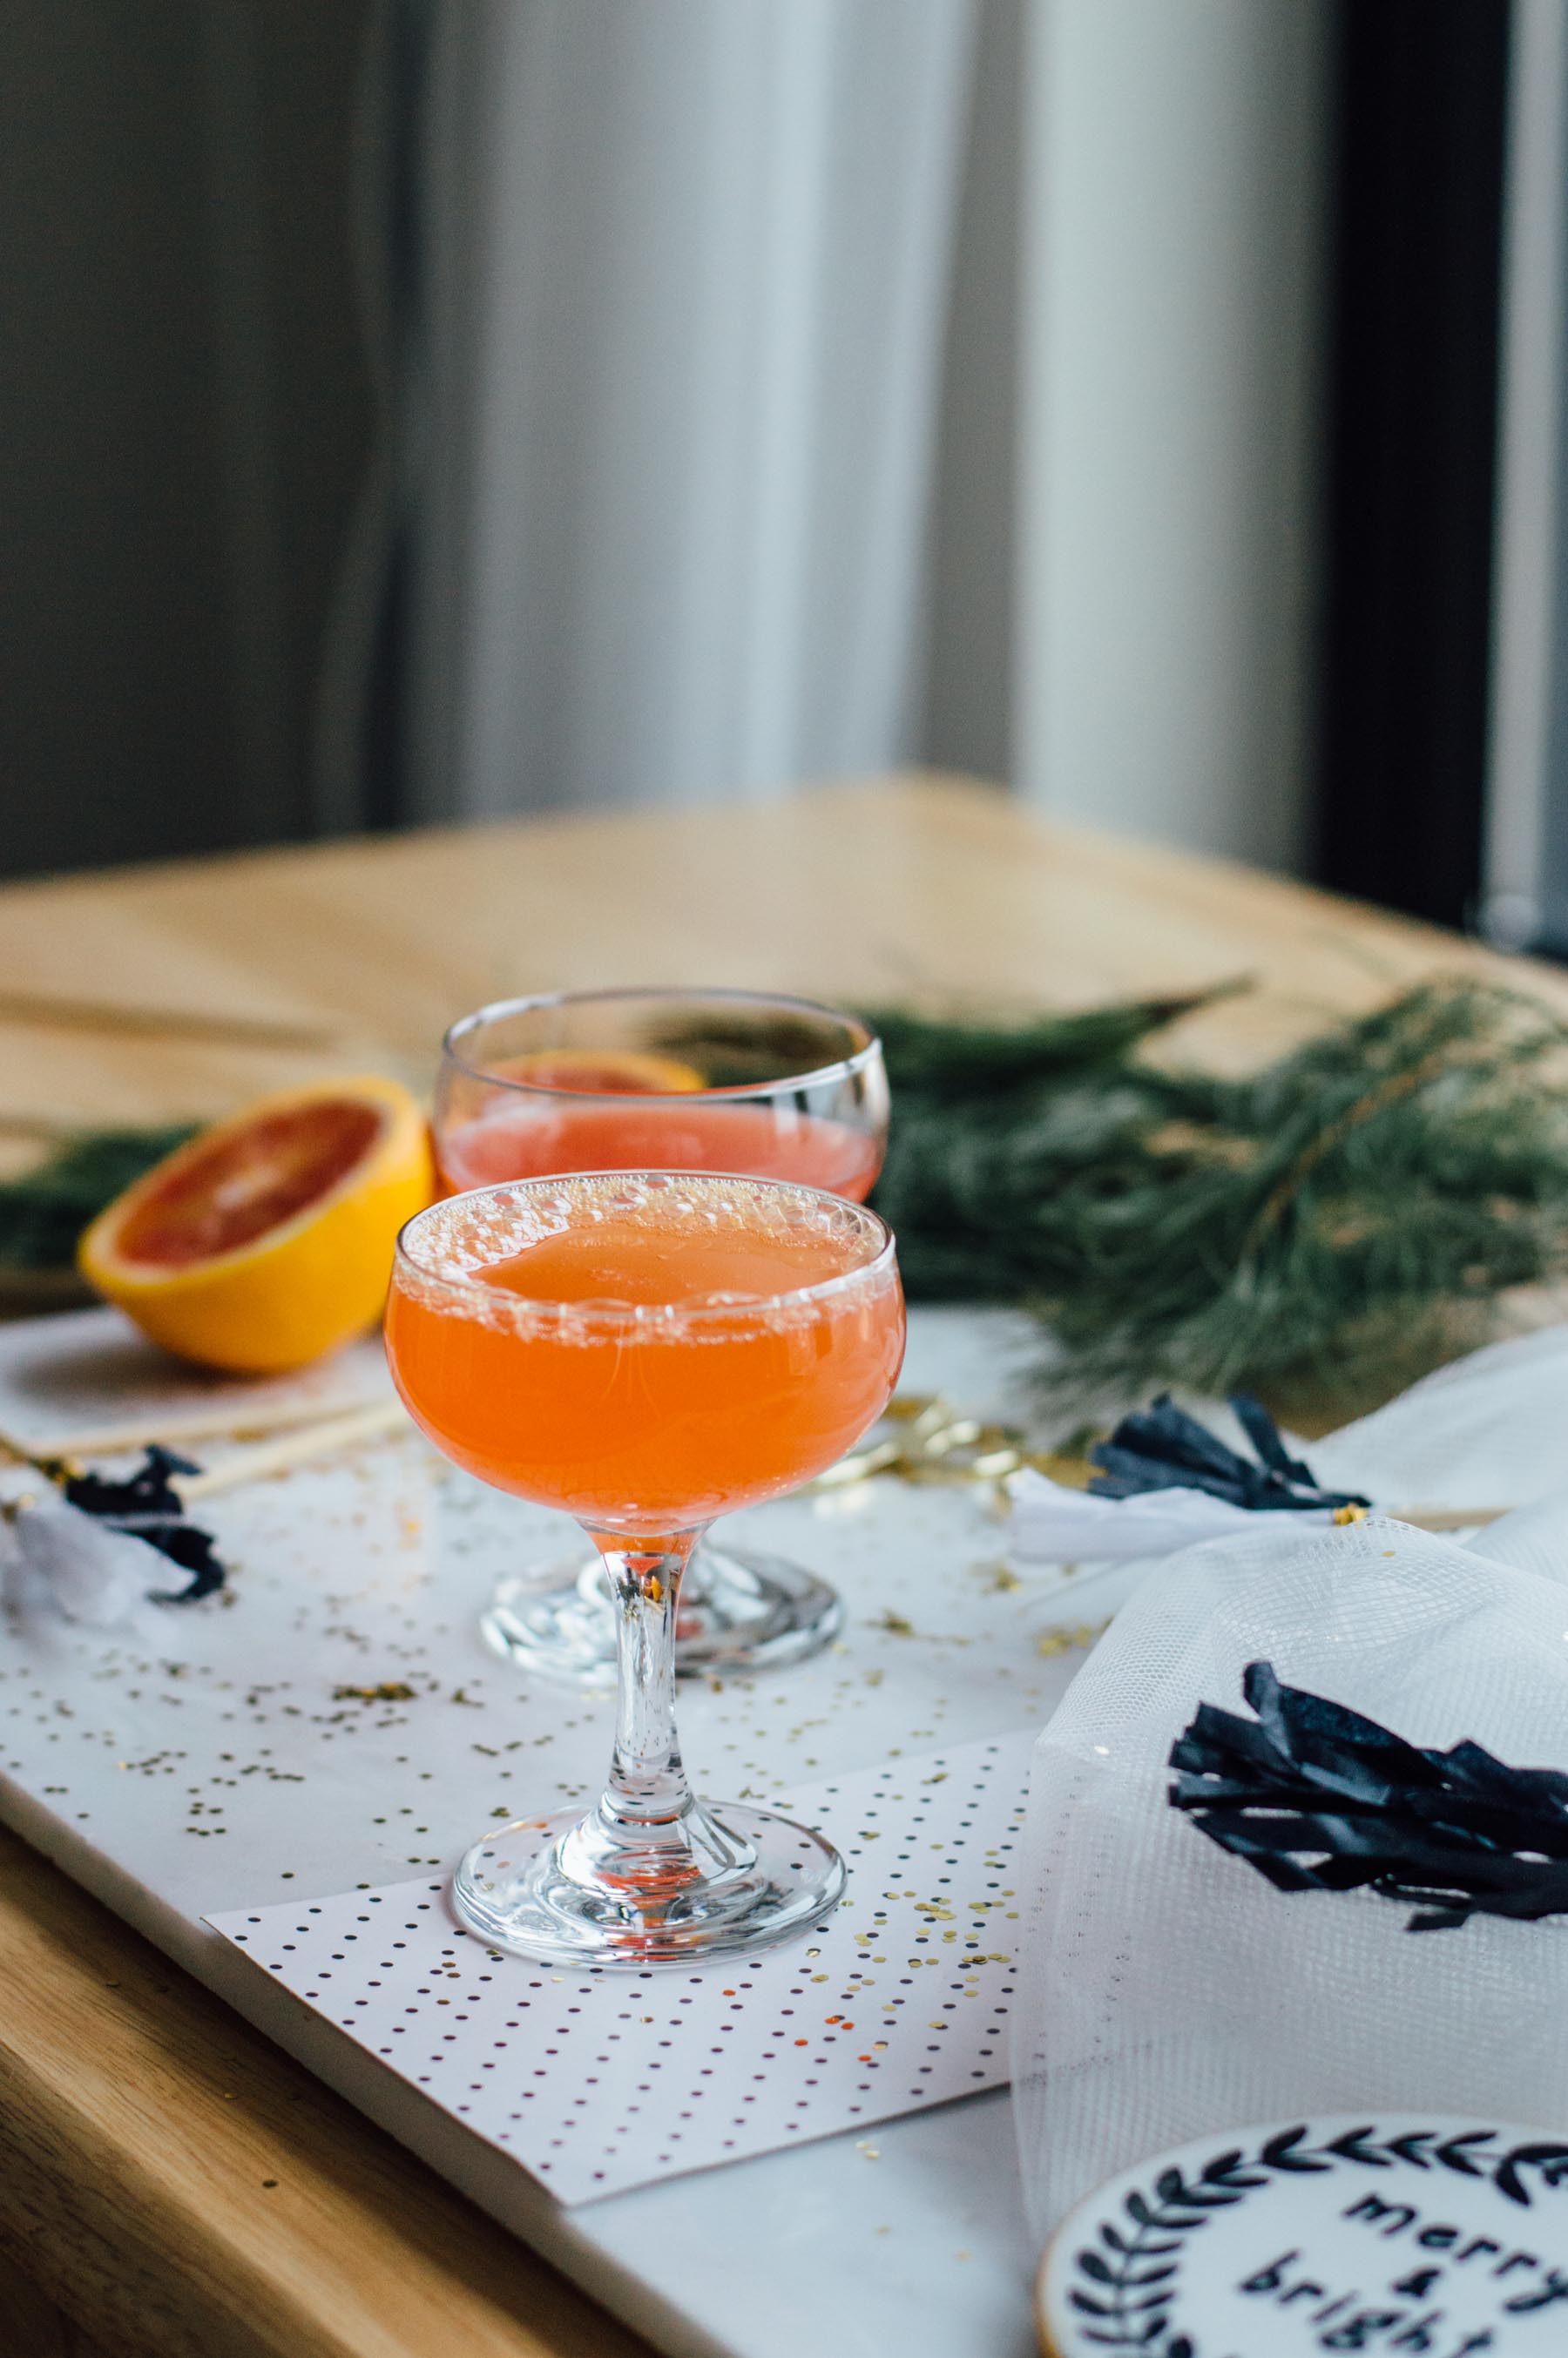 A Blood Orange Cardamom Bubbly cocktail recipe just in time for New Year's Eve! | bygabriella.co